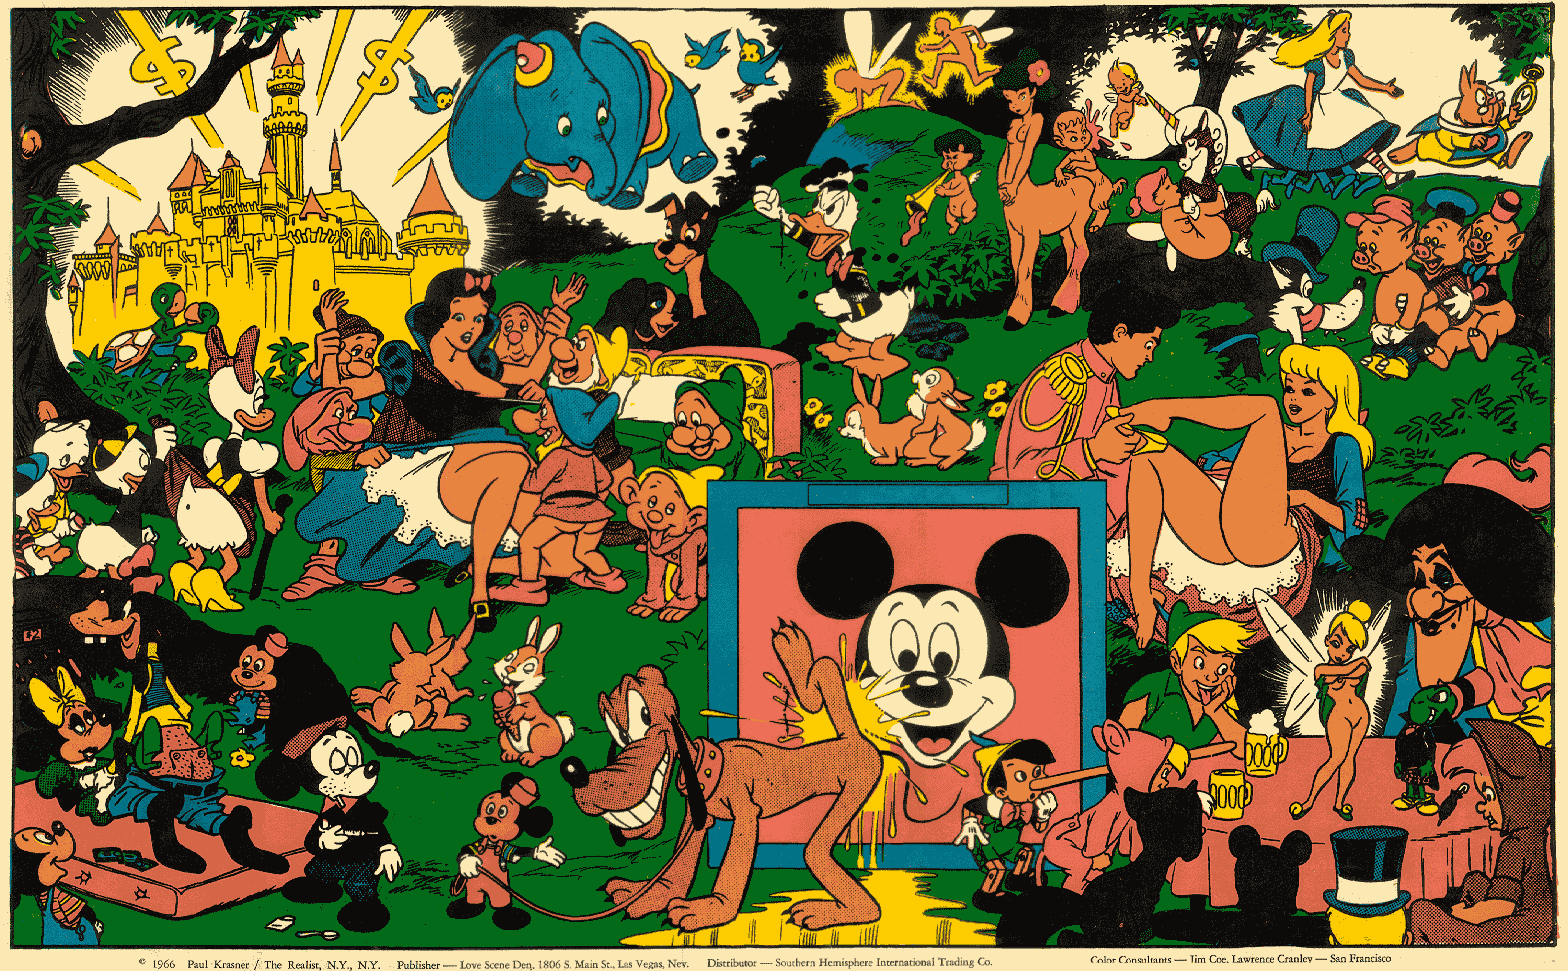 http://www.boingboing.net/images/wally_wood.gif